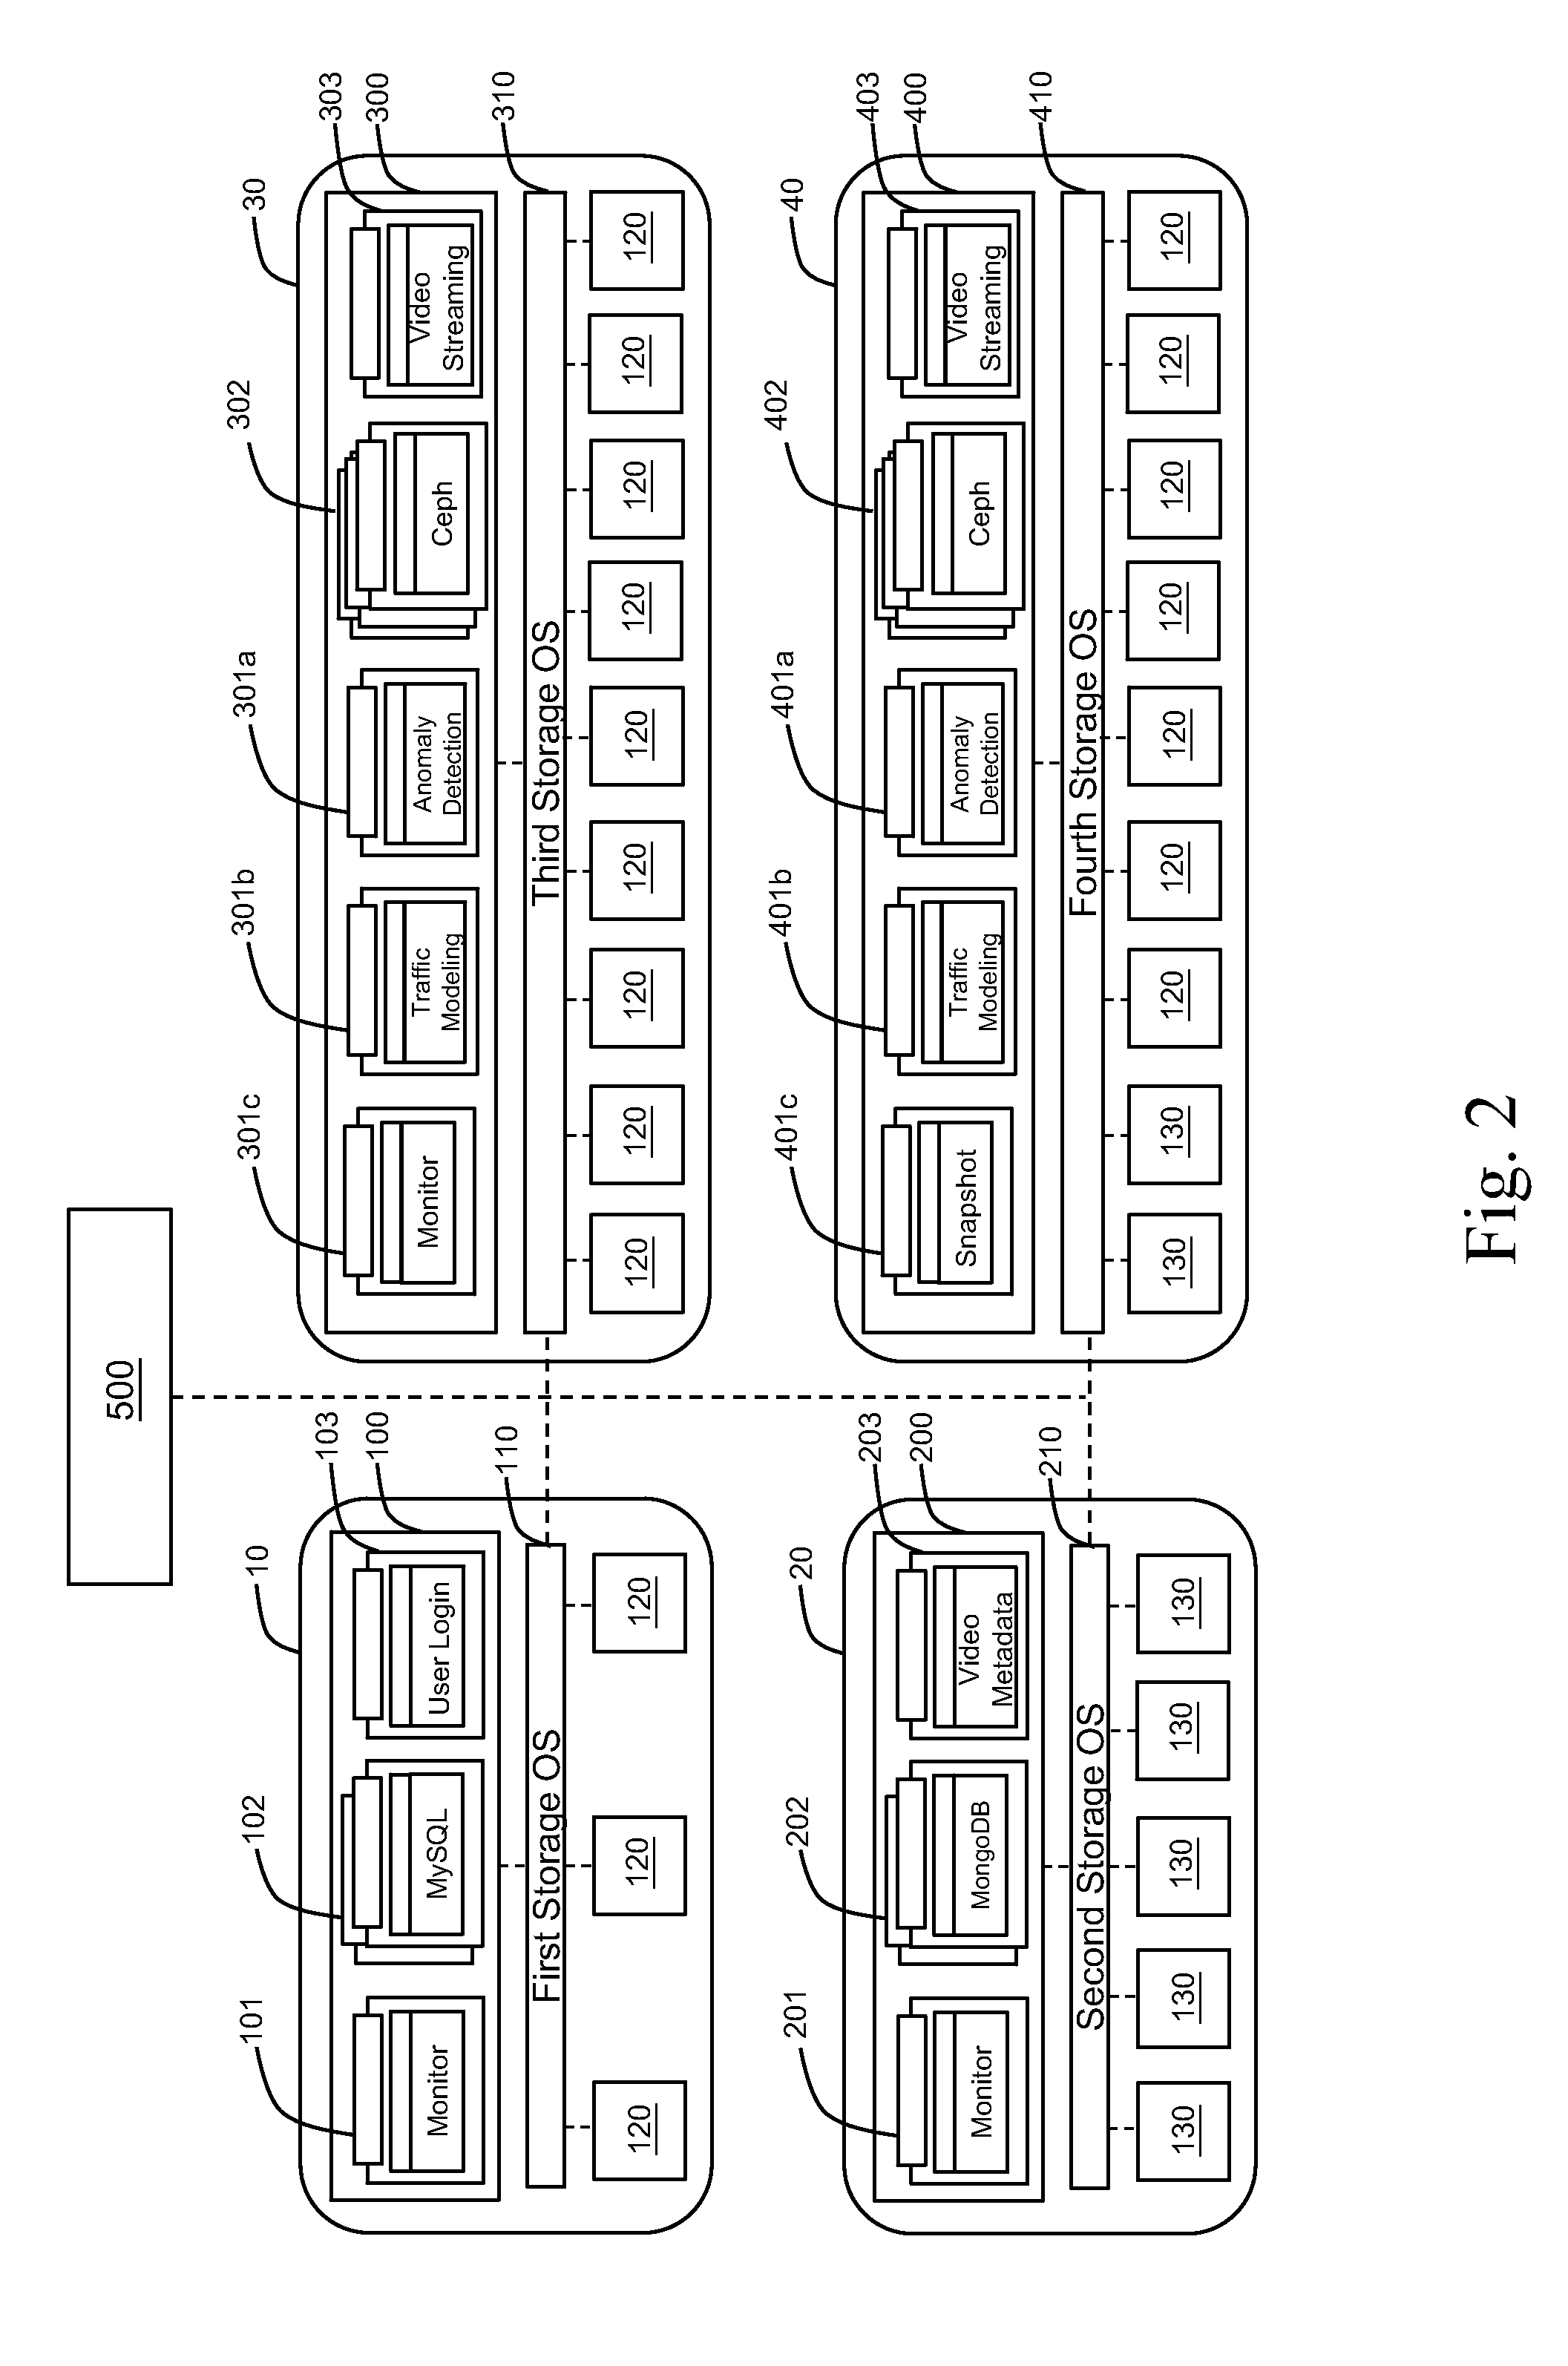 Storage system having node with light weight container